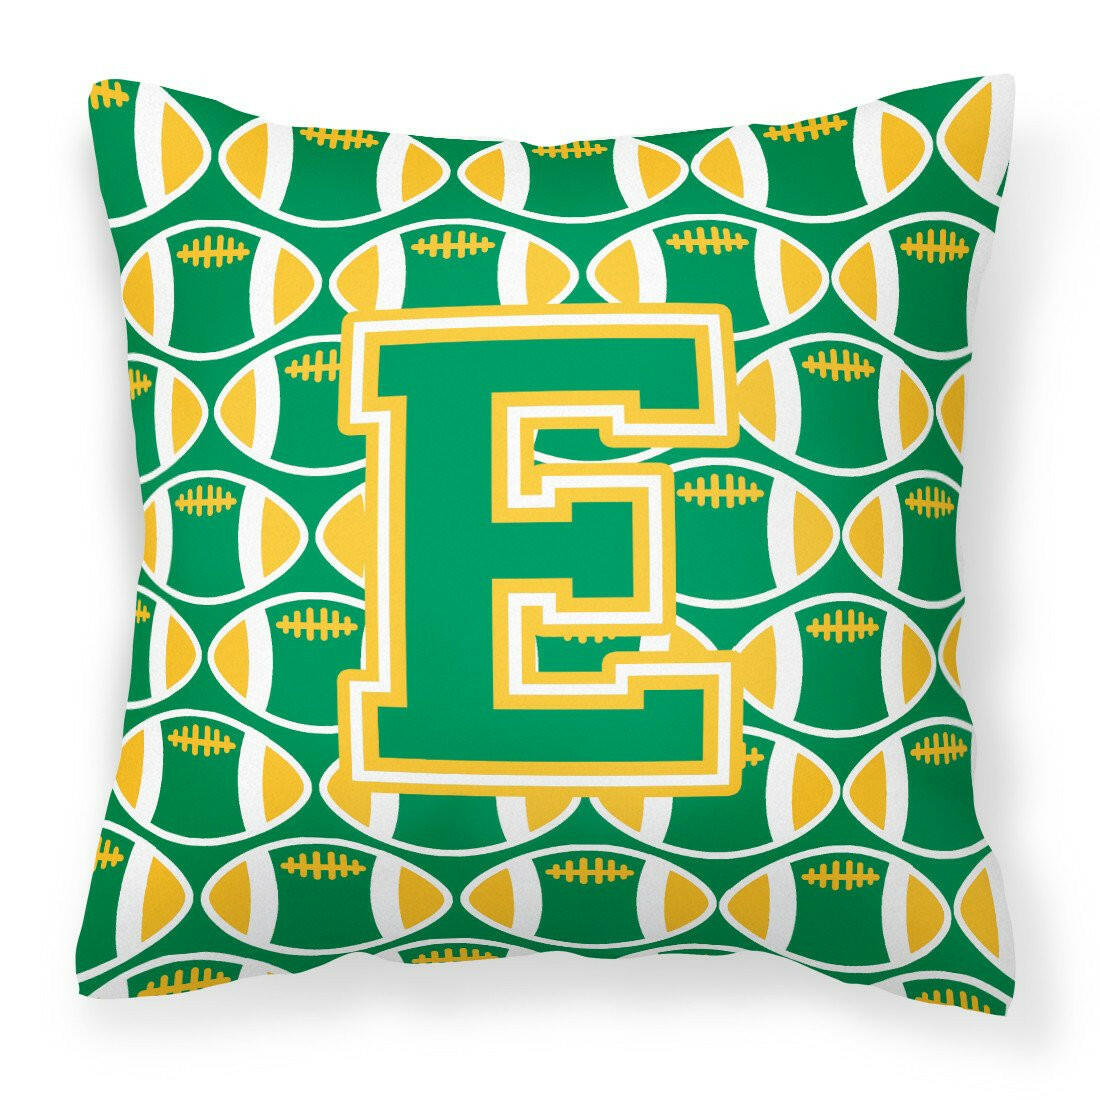 Letter E Football Green and Gold Fabric Decorative Pillow CJ1069-EPW1414 by Caroline's Treasures